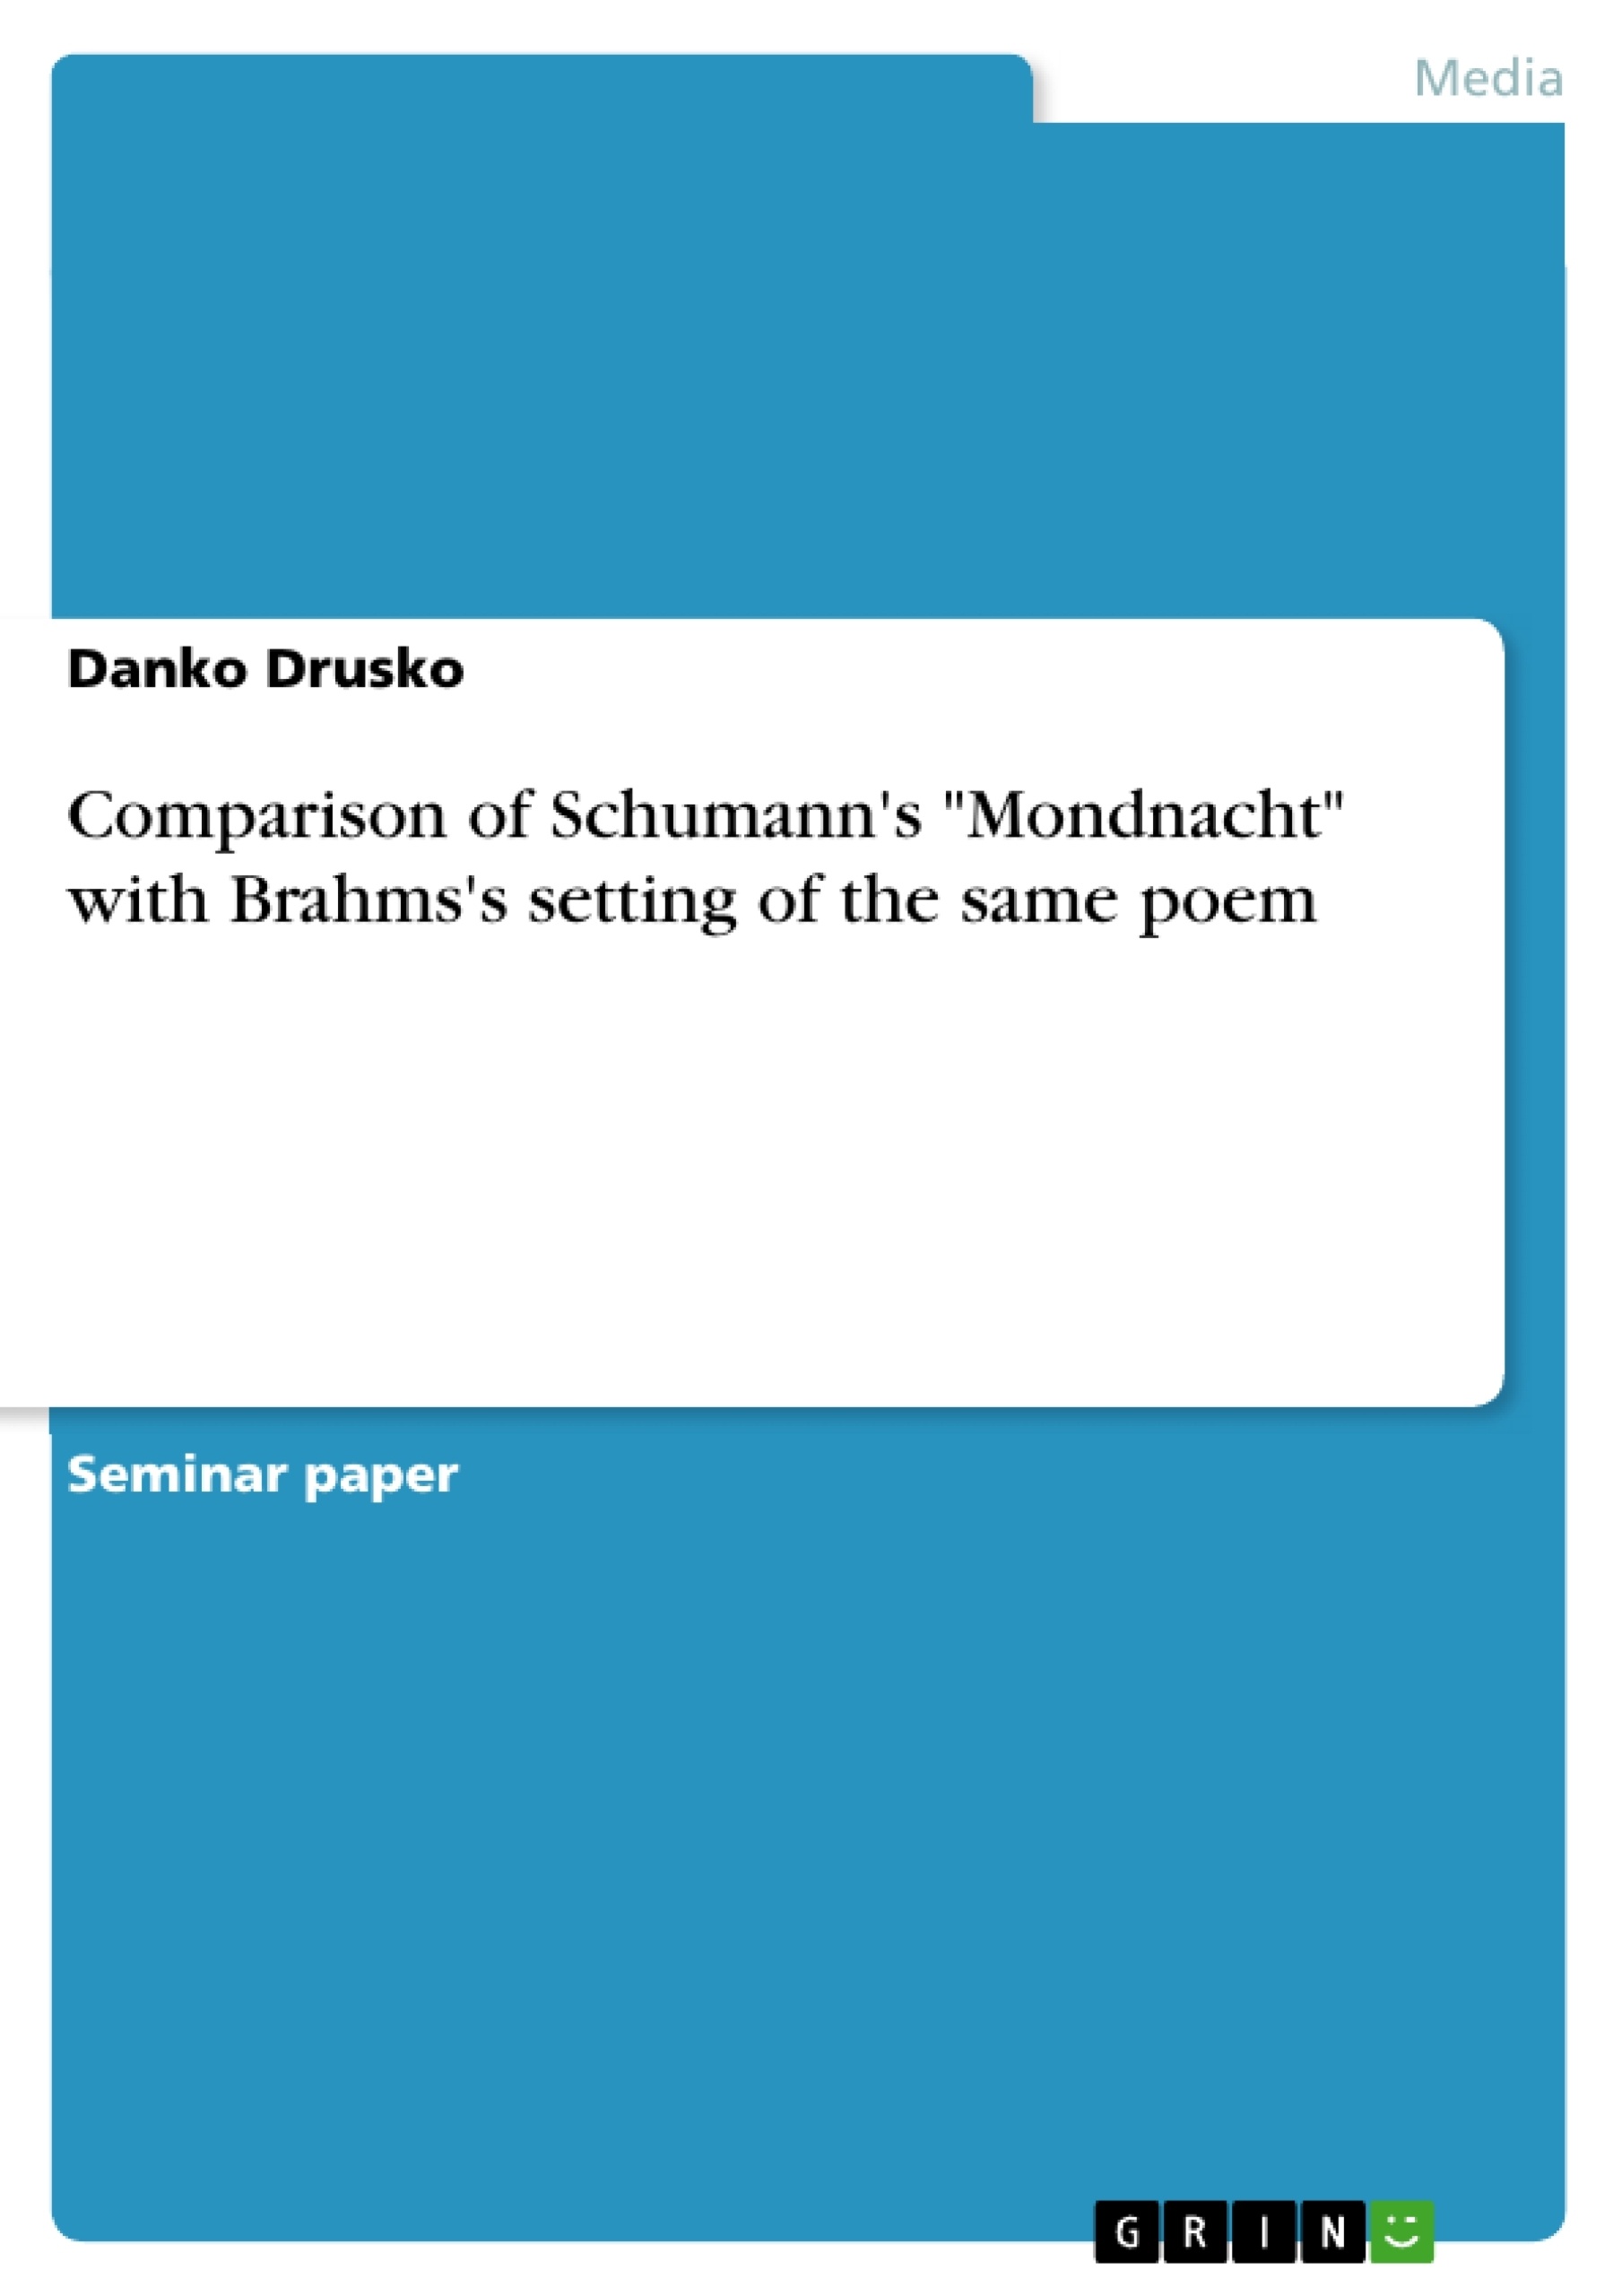 Title: Comparison of Schumann's "Mondnacht" with Brahms's setting of the same poem